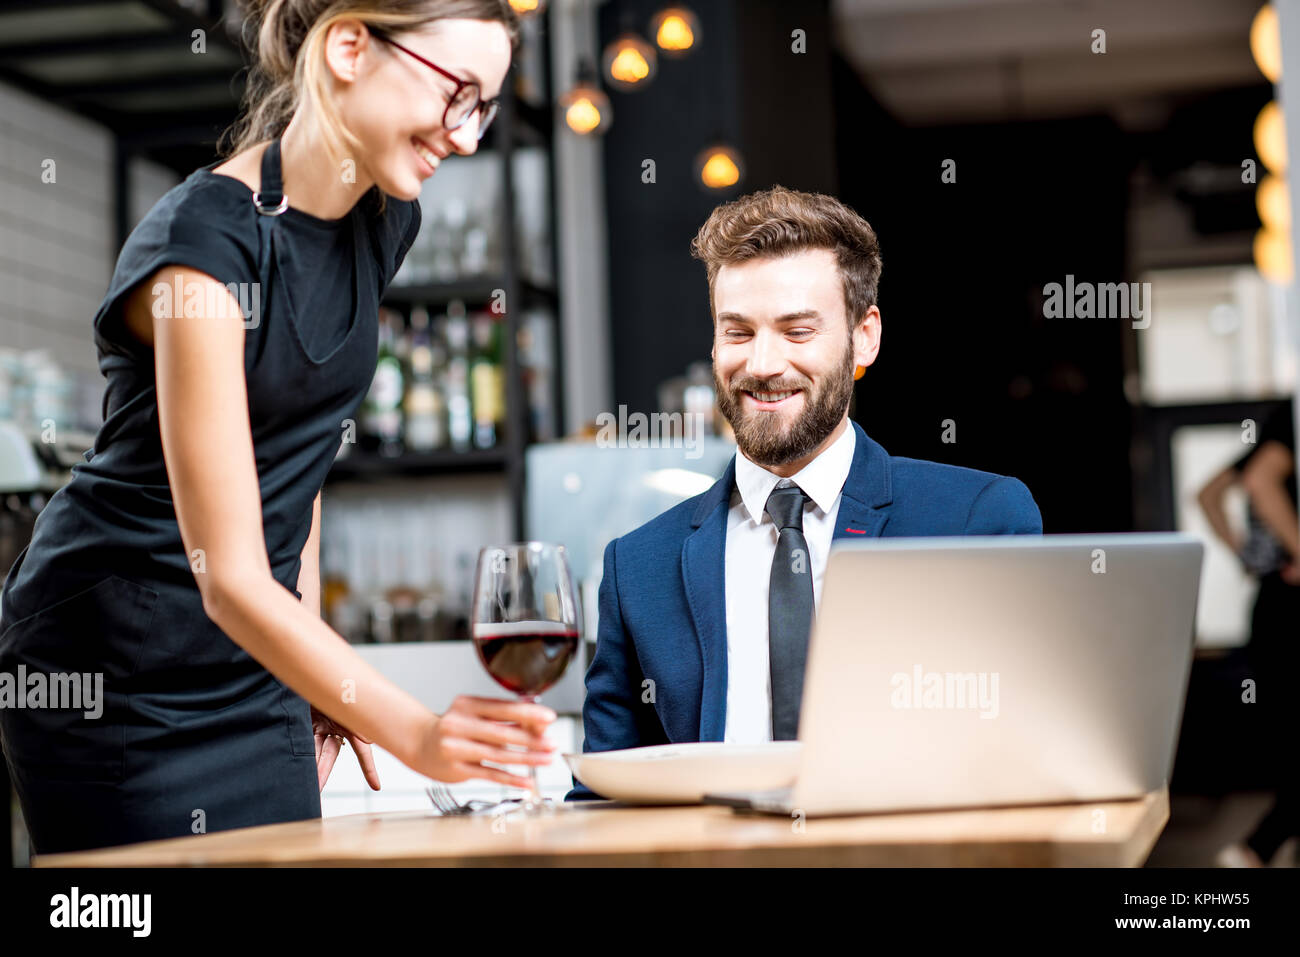 Businessman with waitress at the restaurant Stock Photo